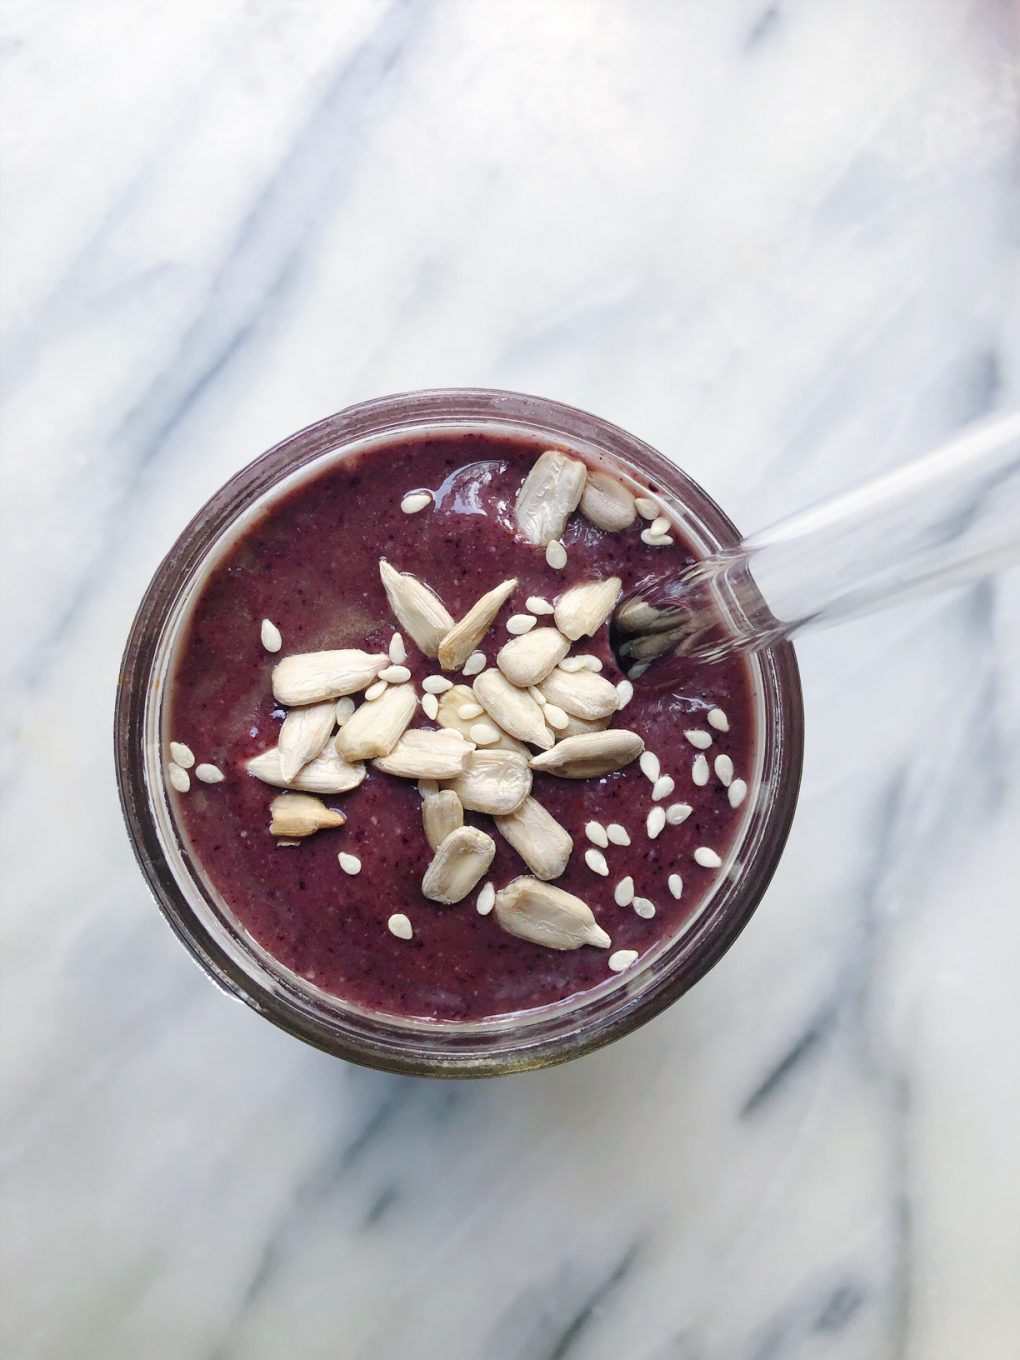  a purple berry avocado smoothie on a marble background topped with sunflower seeds and sesame seeds with a glass straw